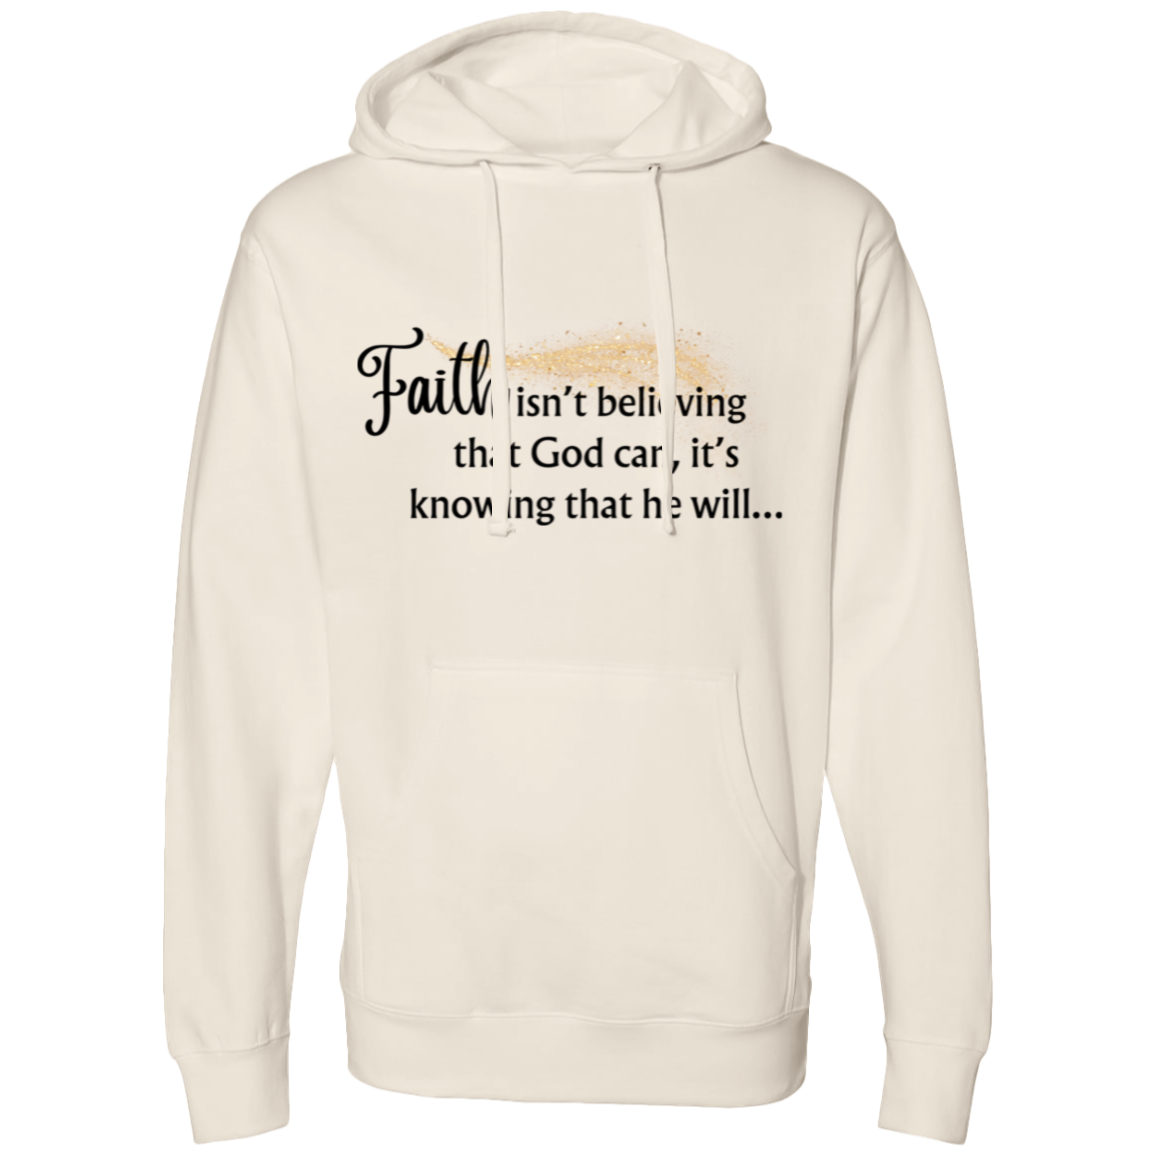 Faith Hooded Sweatshirt it’s beautiful for the Holiday Season or anytime to be wrapped in Gods love